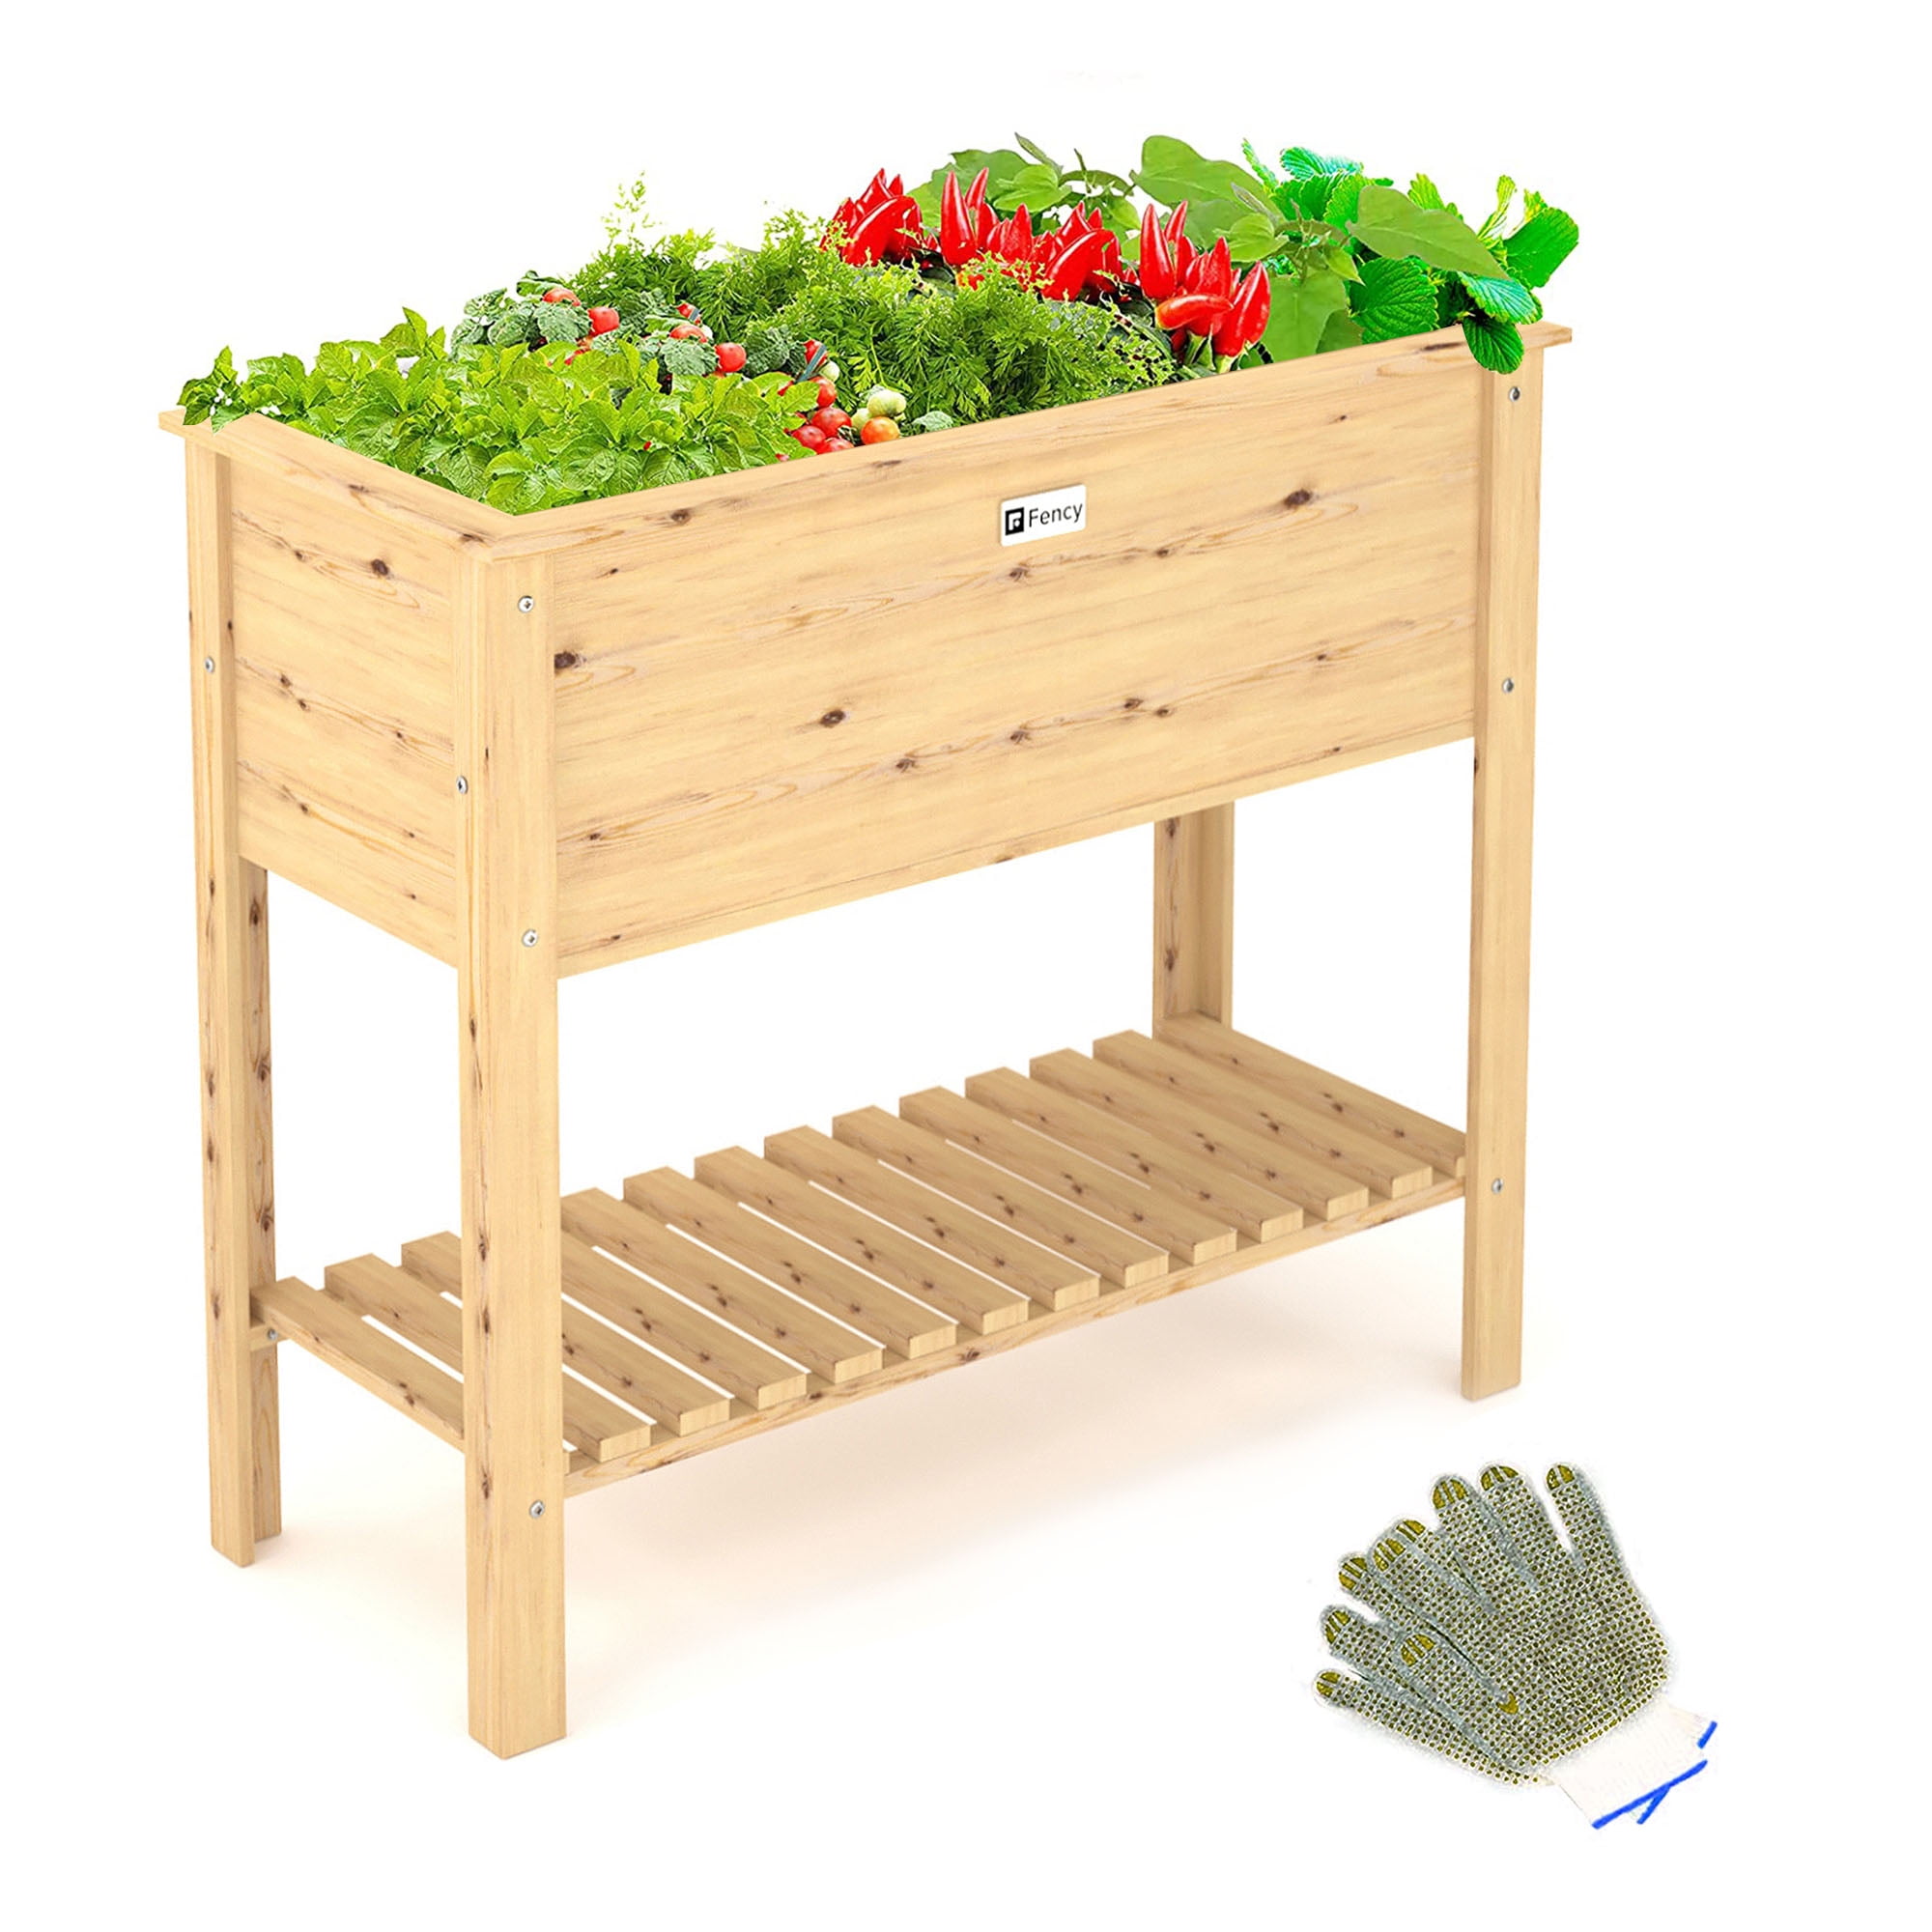 32”H Raised Garden Bed Patio Elevated Planter Box Vegetable Herb Outdoor Yard 